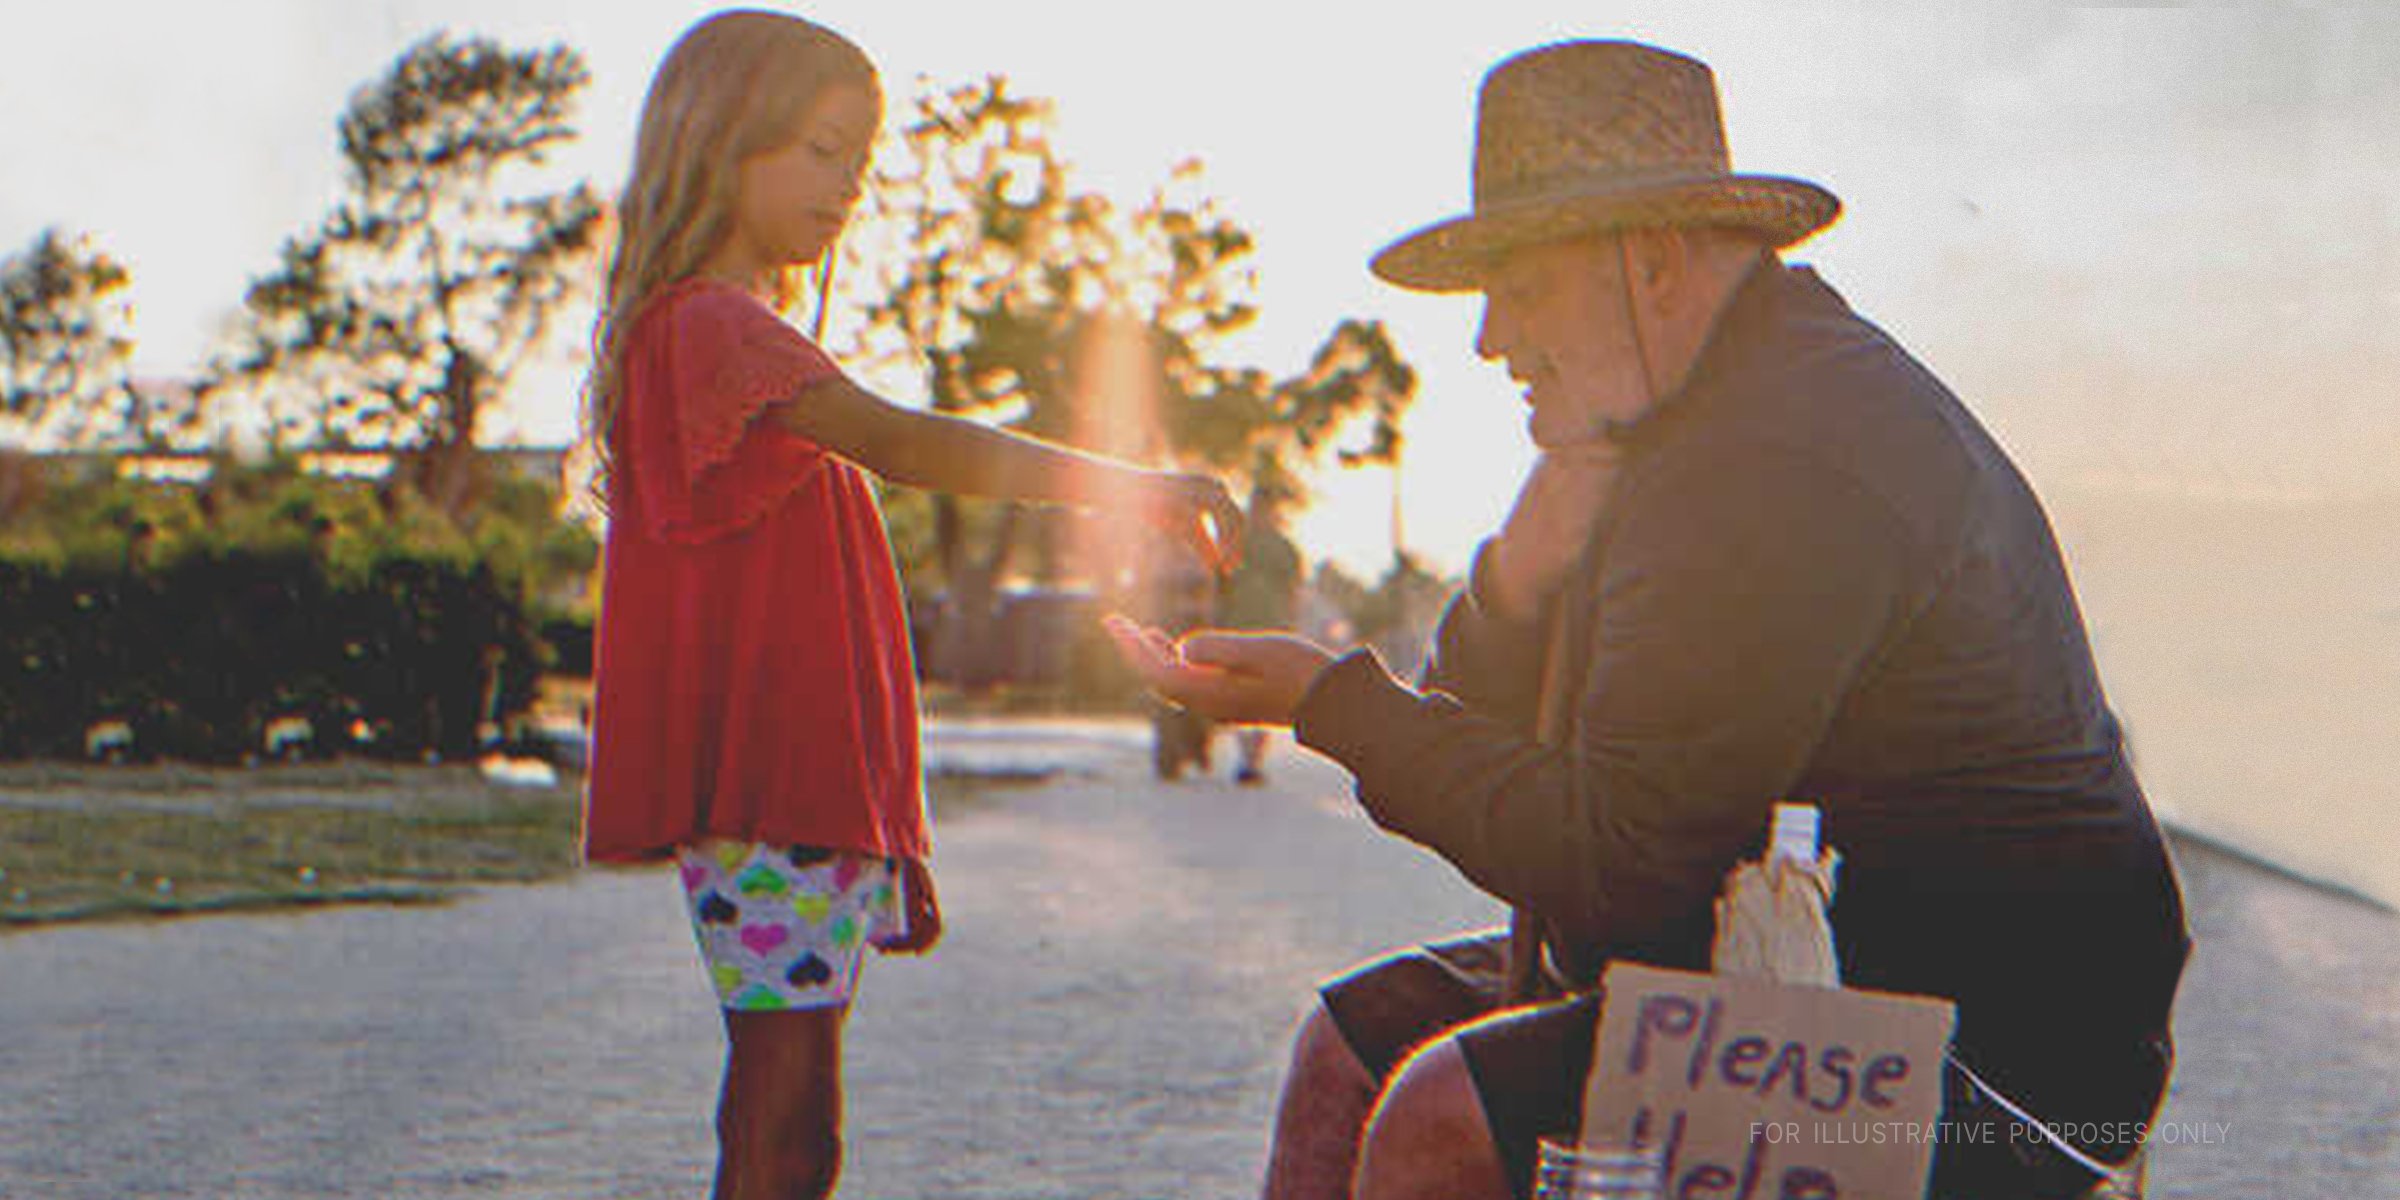 Little girl giving alms to an older man | Getty Images